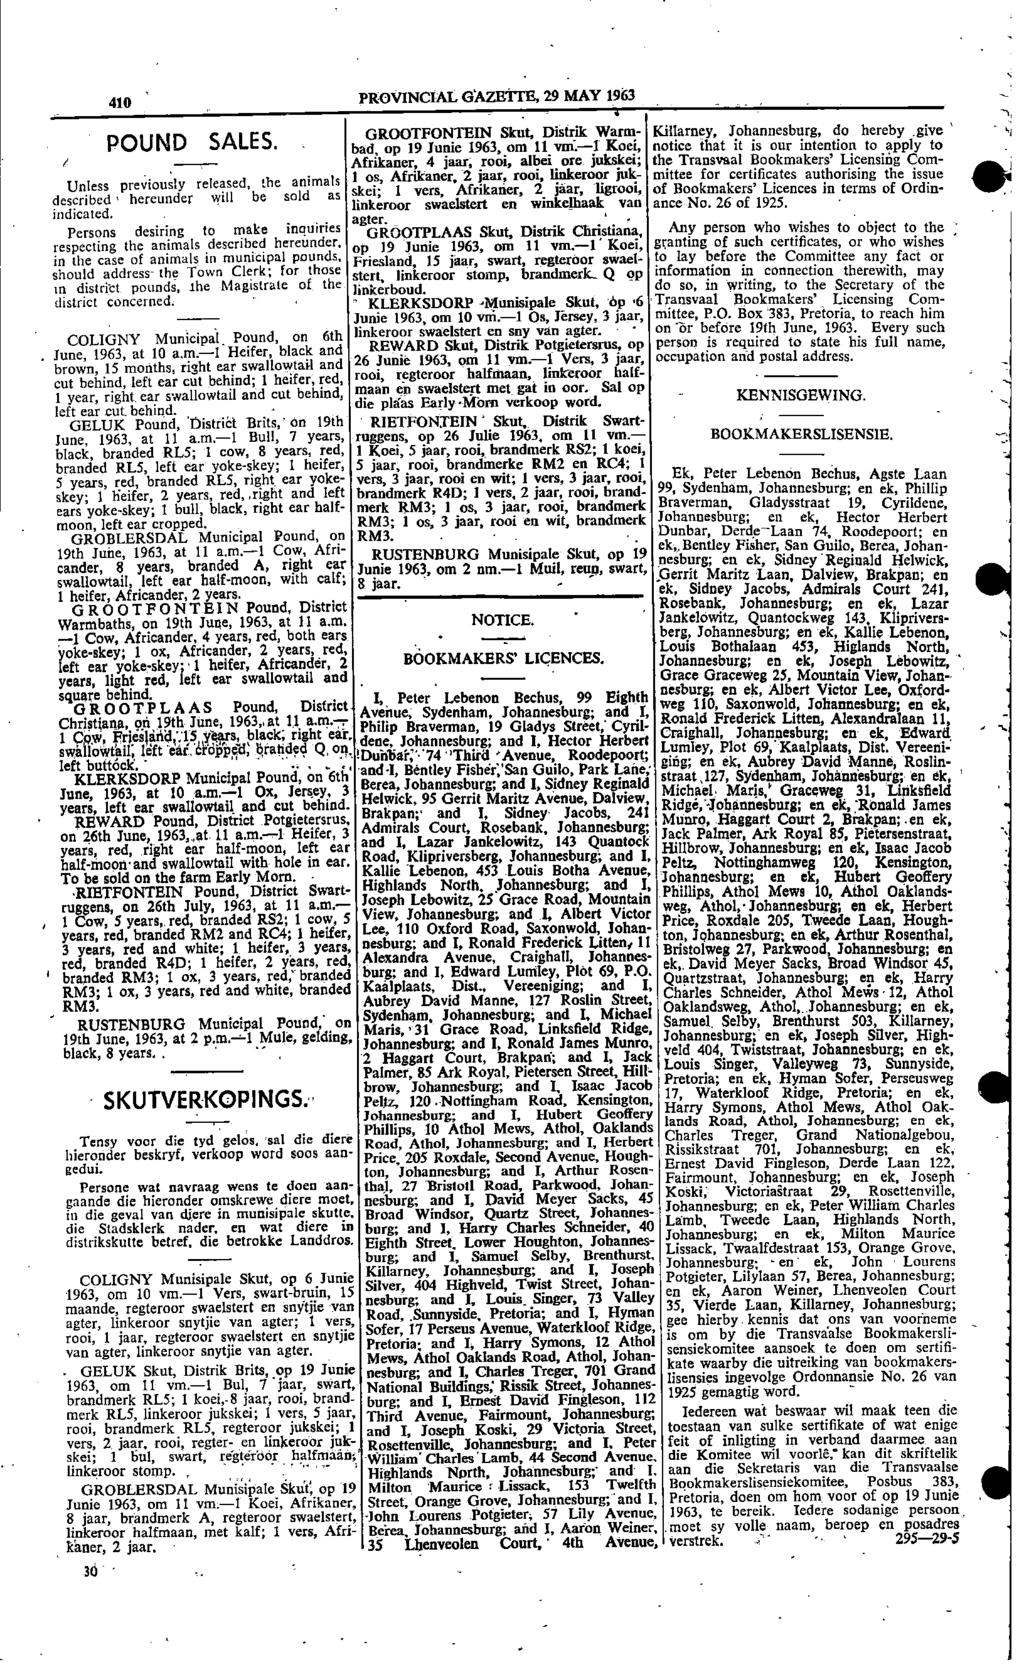 410 PROVNCAL GAZETTE 29 MAY 1963 4 li GROOTFONTEN Skut Distrilt Warm Killarney Johannesburg do hereby give POUND SALES bad op 19 Junie 1963 om 11 vof 1 Koei notice that it is our intention to apply